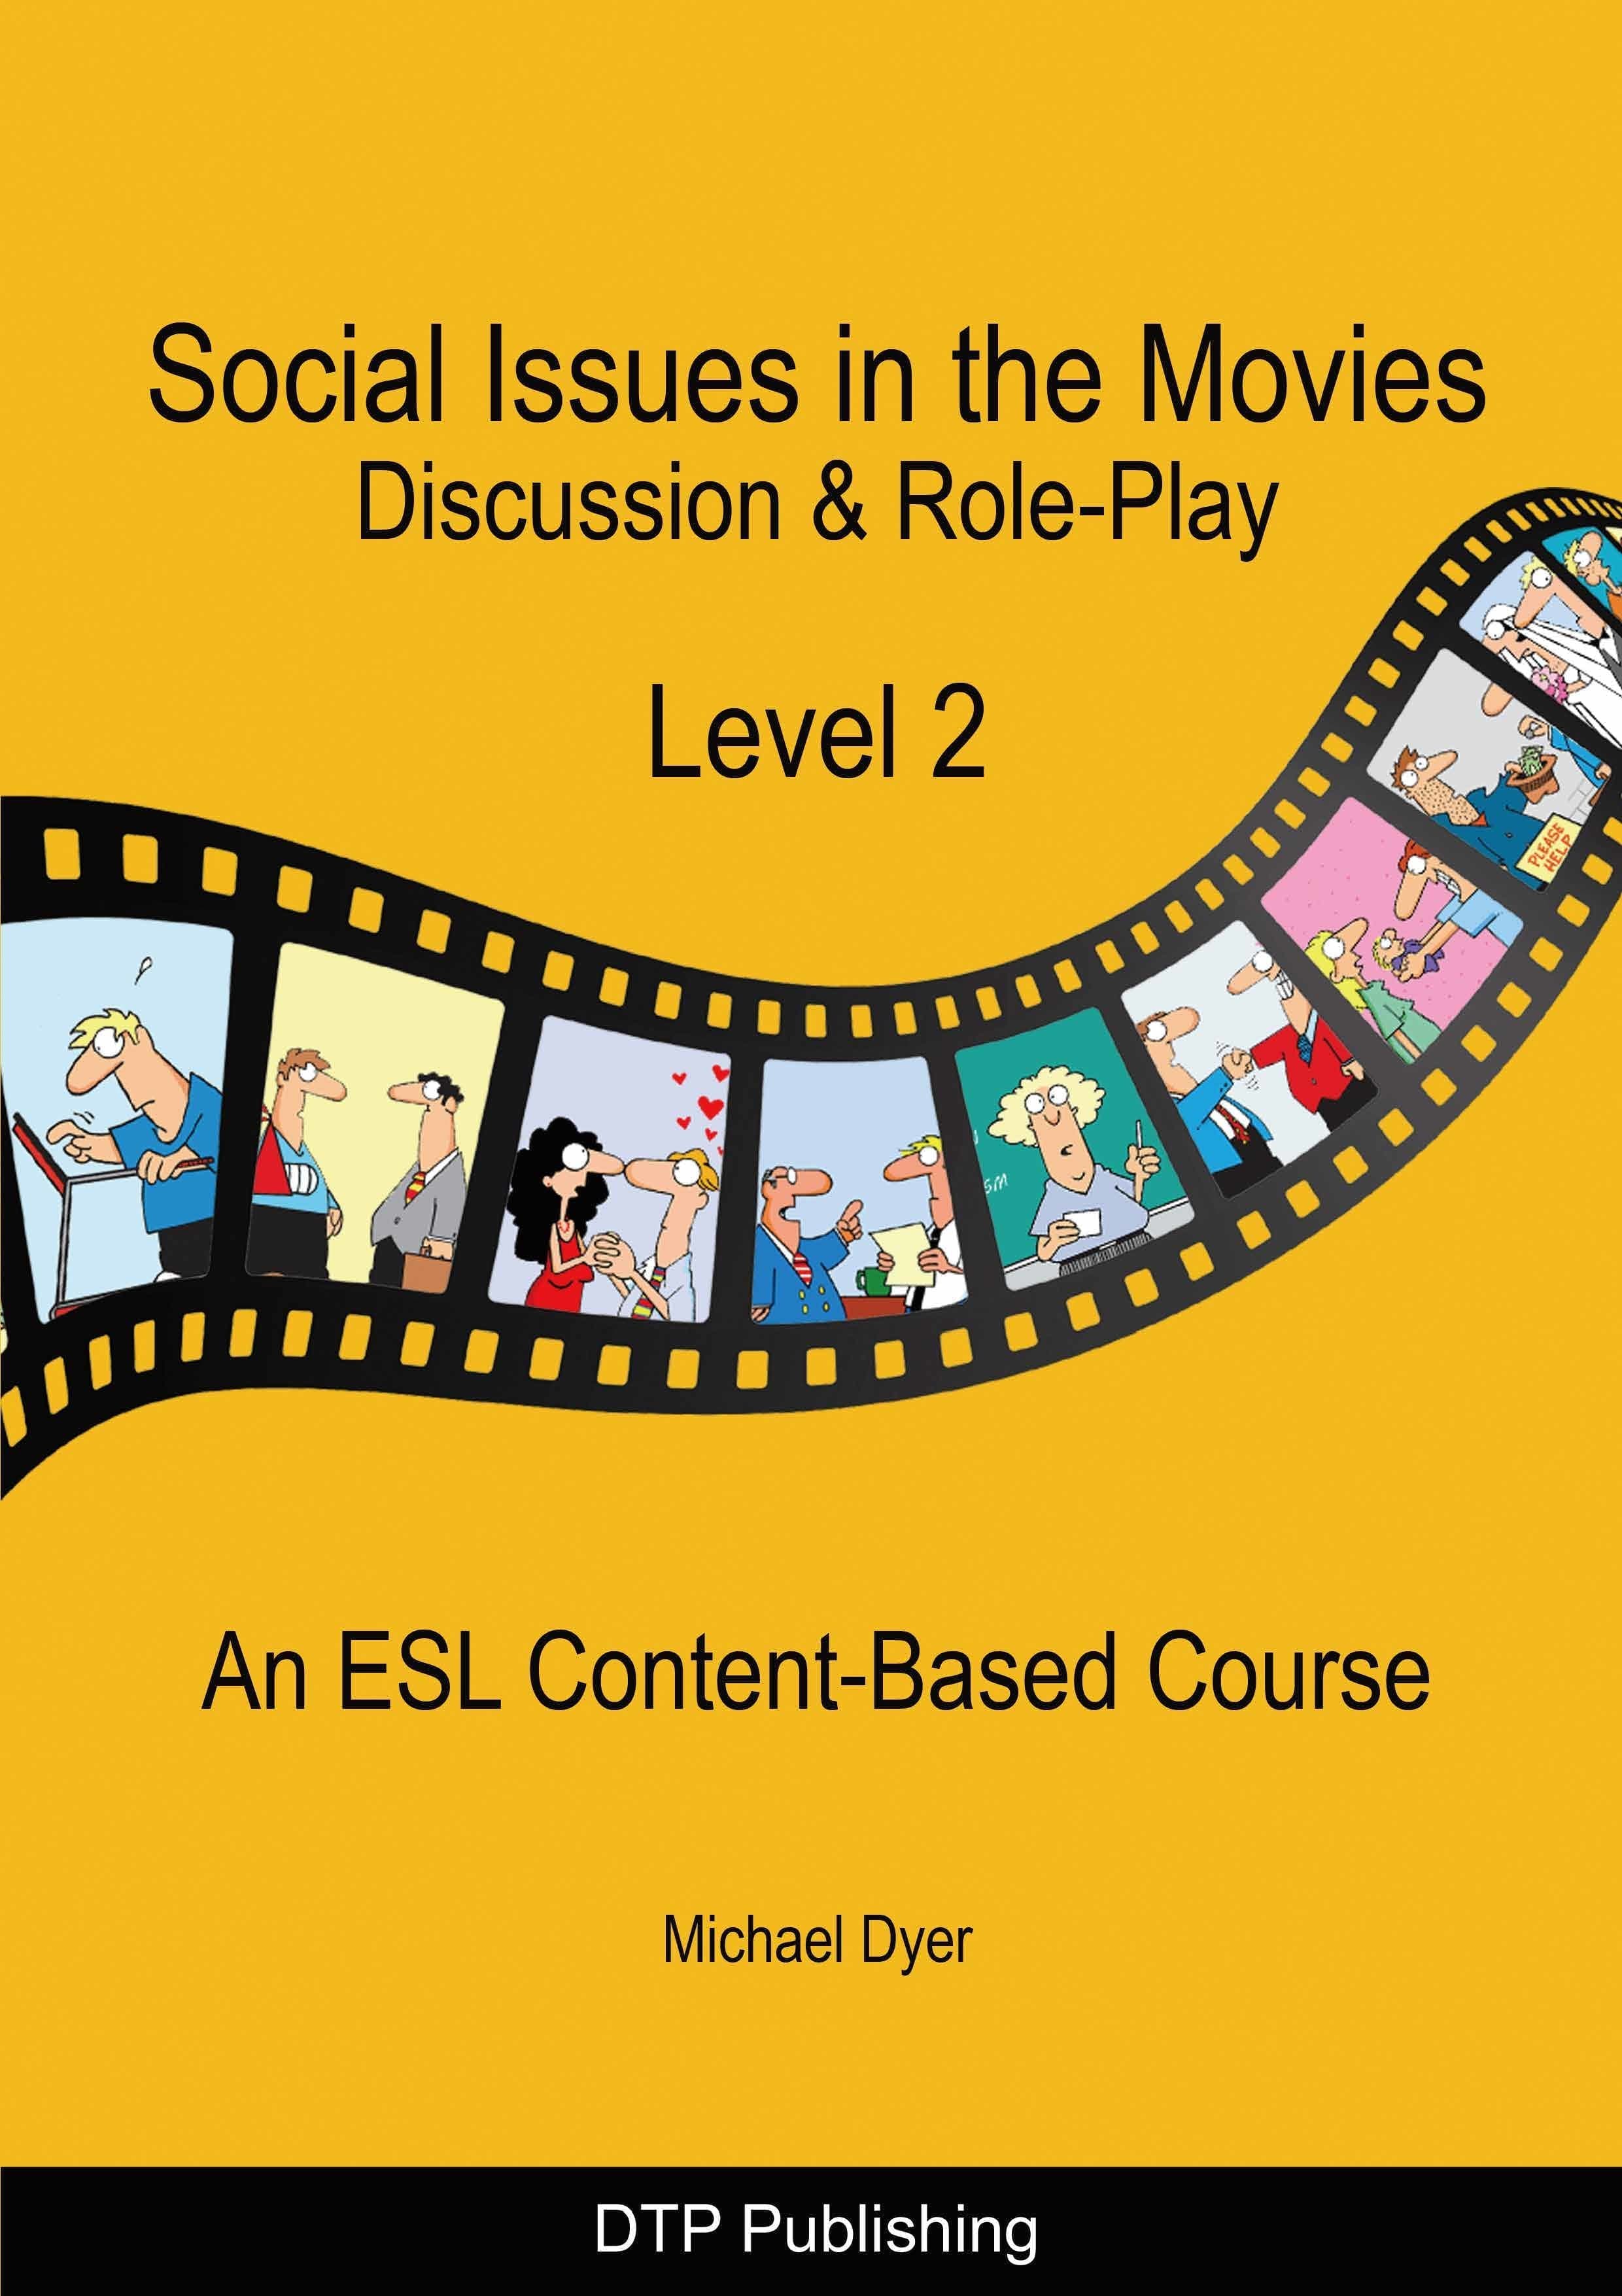 『Social Issues in the Movies Level2』Michael Dyer　著